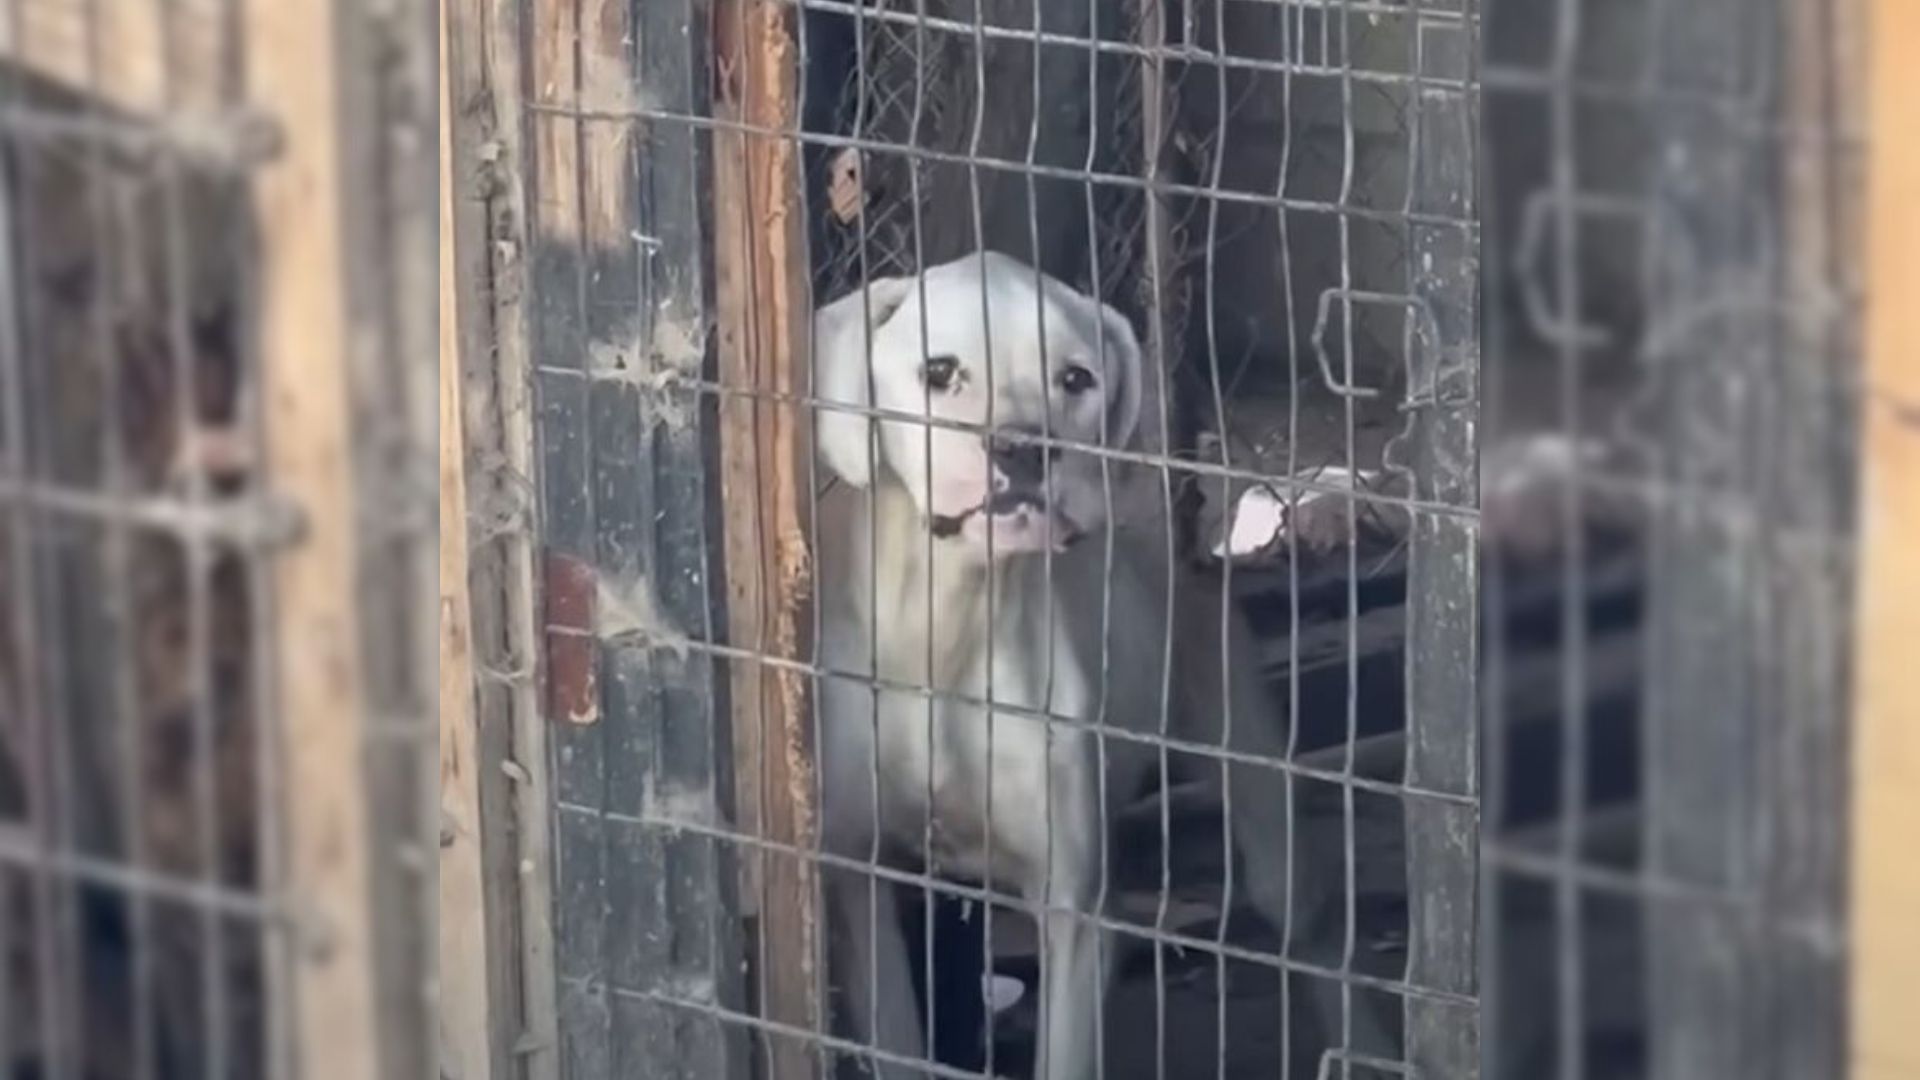 Adorable Dog Who Was Kept In A Cage For A Long Time Battled Depression Until She Met Her Fosters